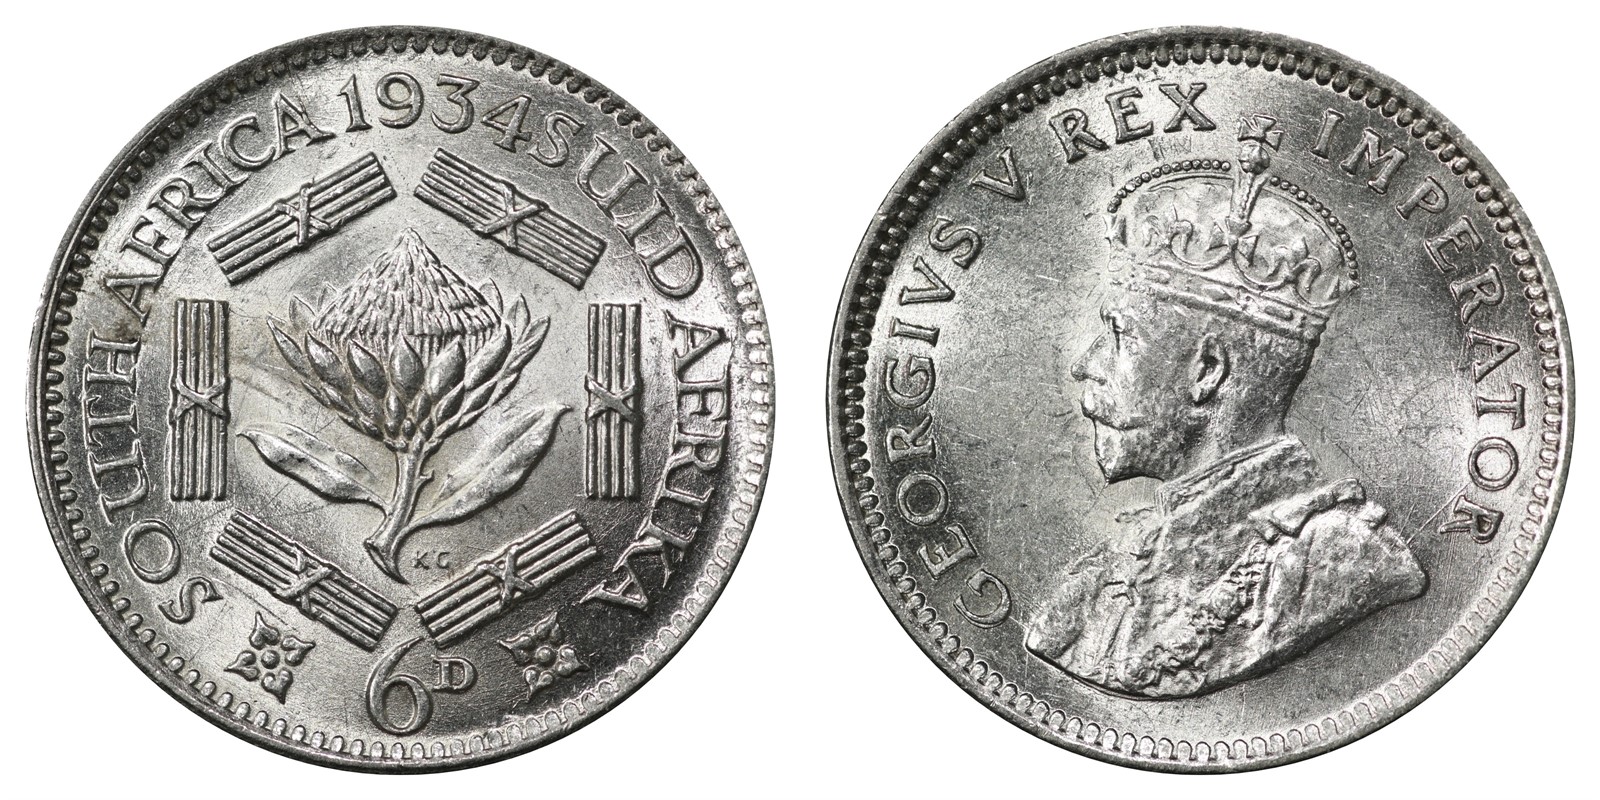 South Africa - George V - 6 Pence 1934 - UNC *